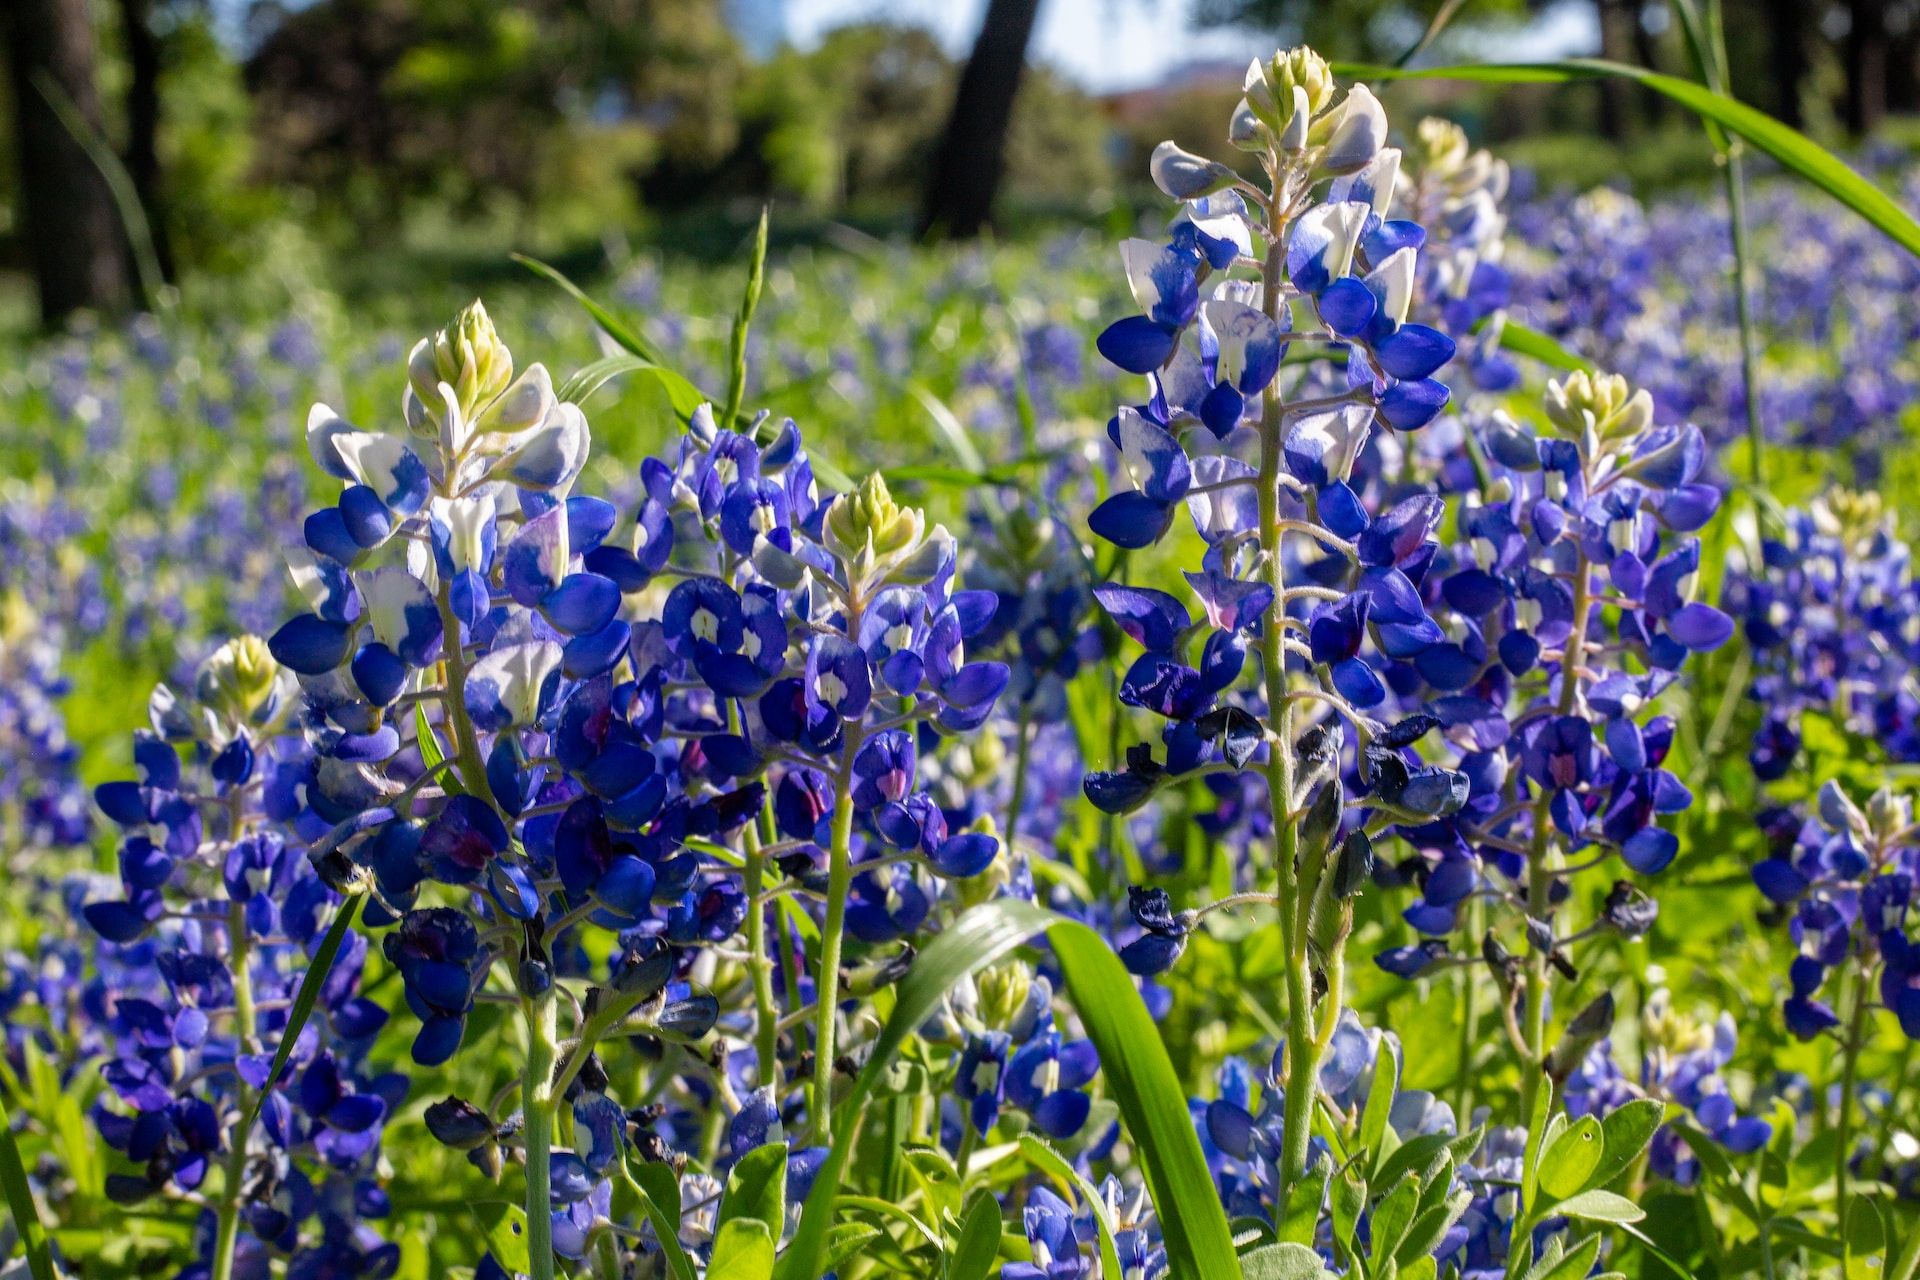 Blooming bluebonnets in Texas Hill County, Texas, USA